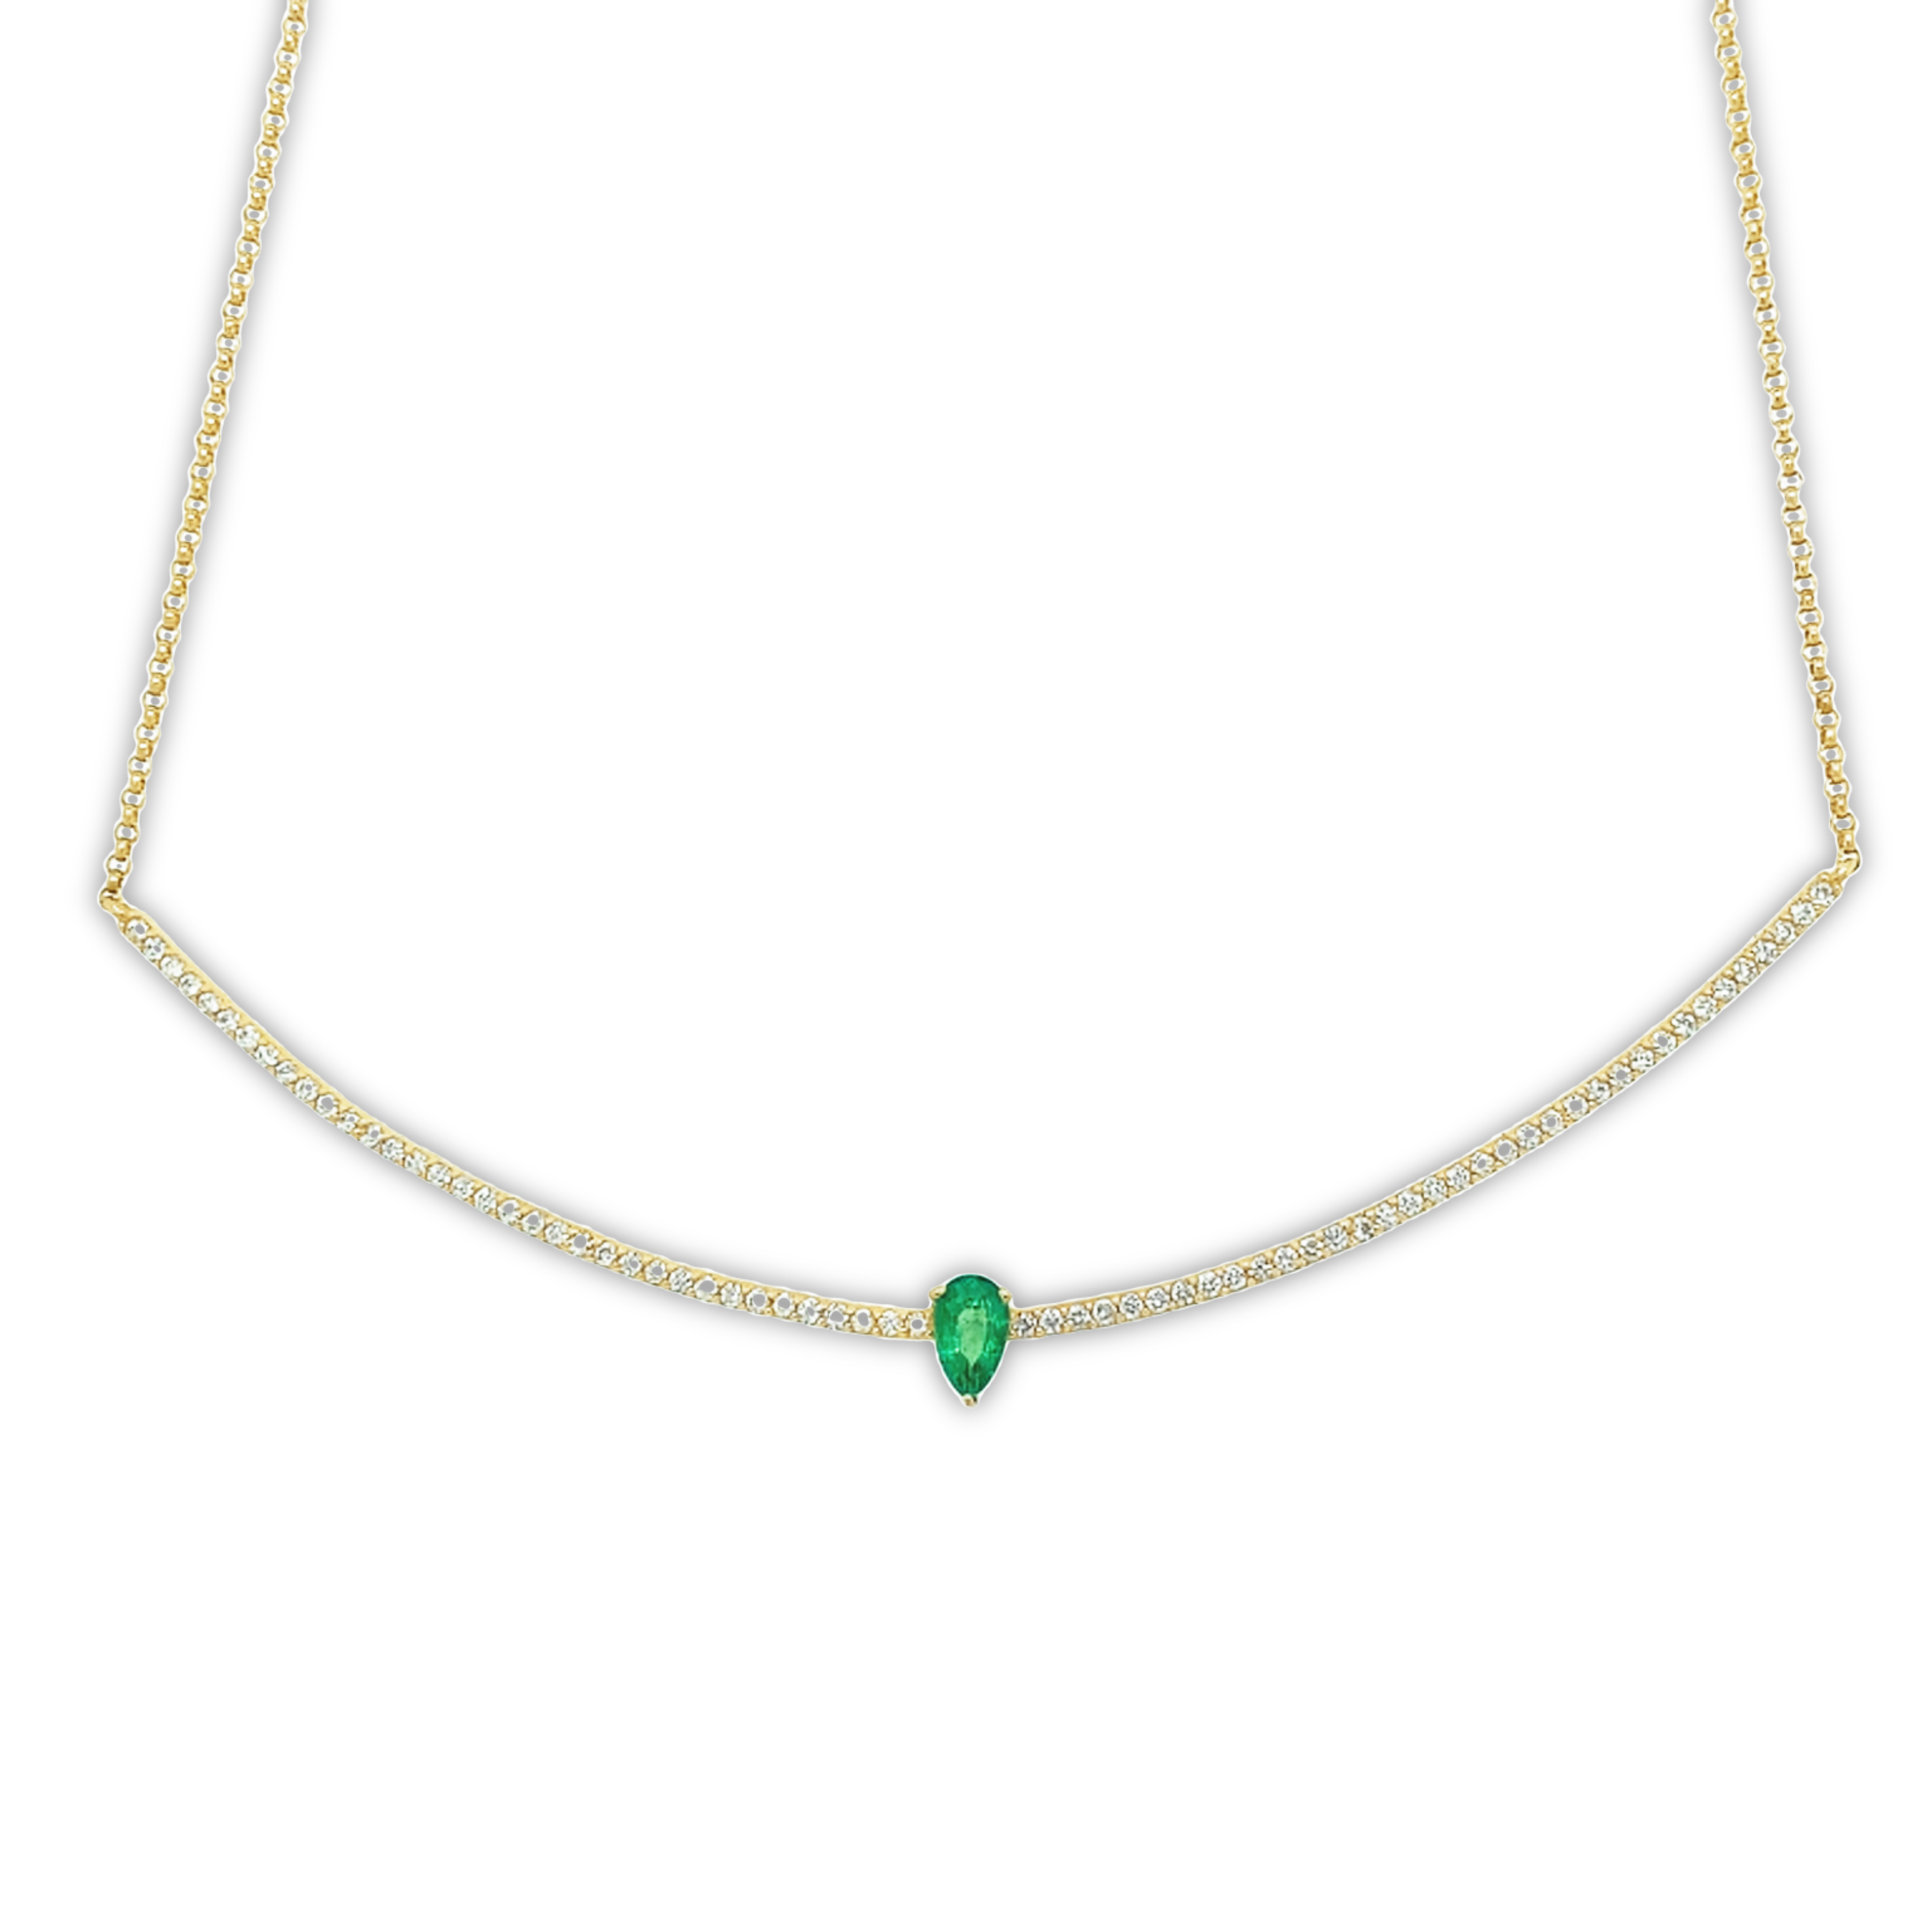 Featured image for “Diamond and Emerald Curved Bar Necklace”